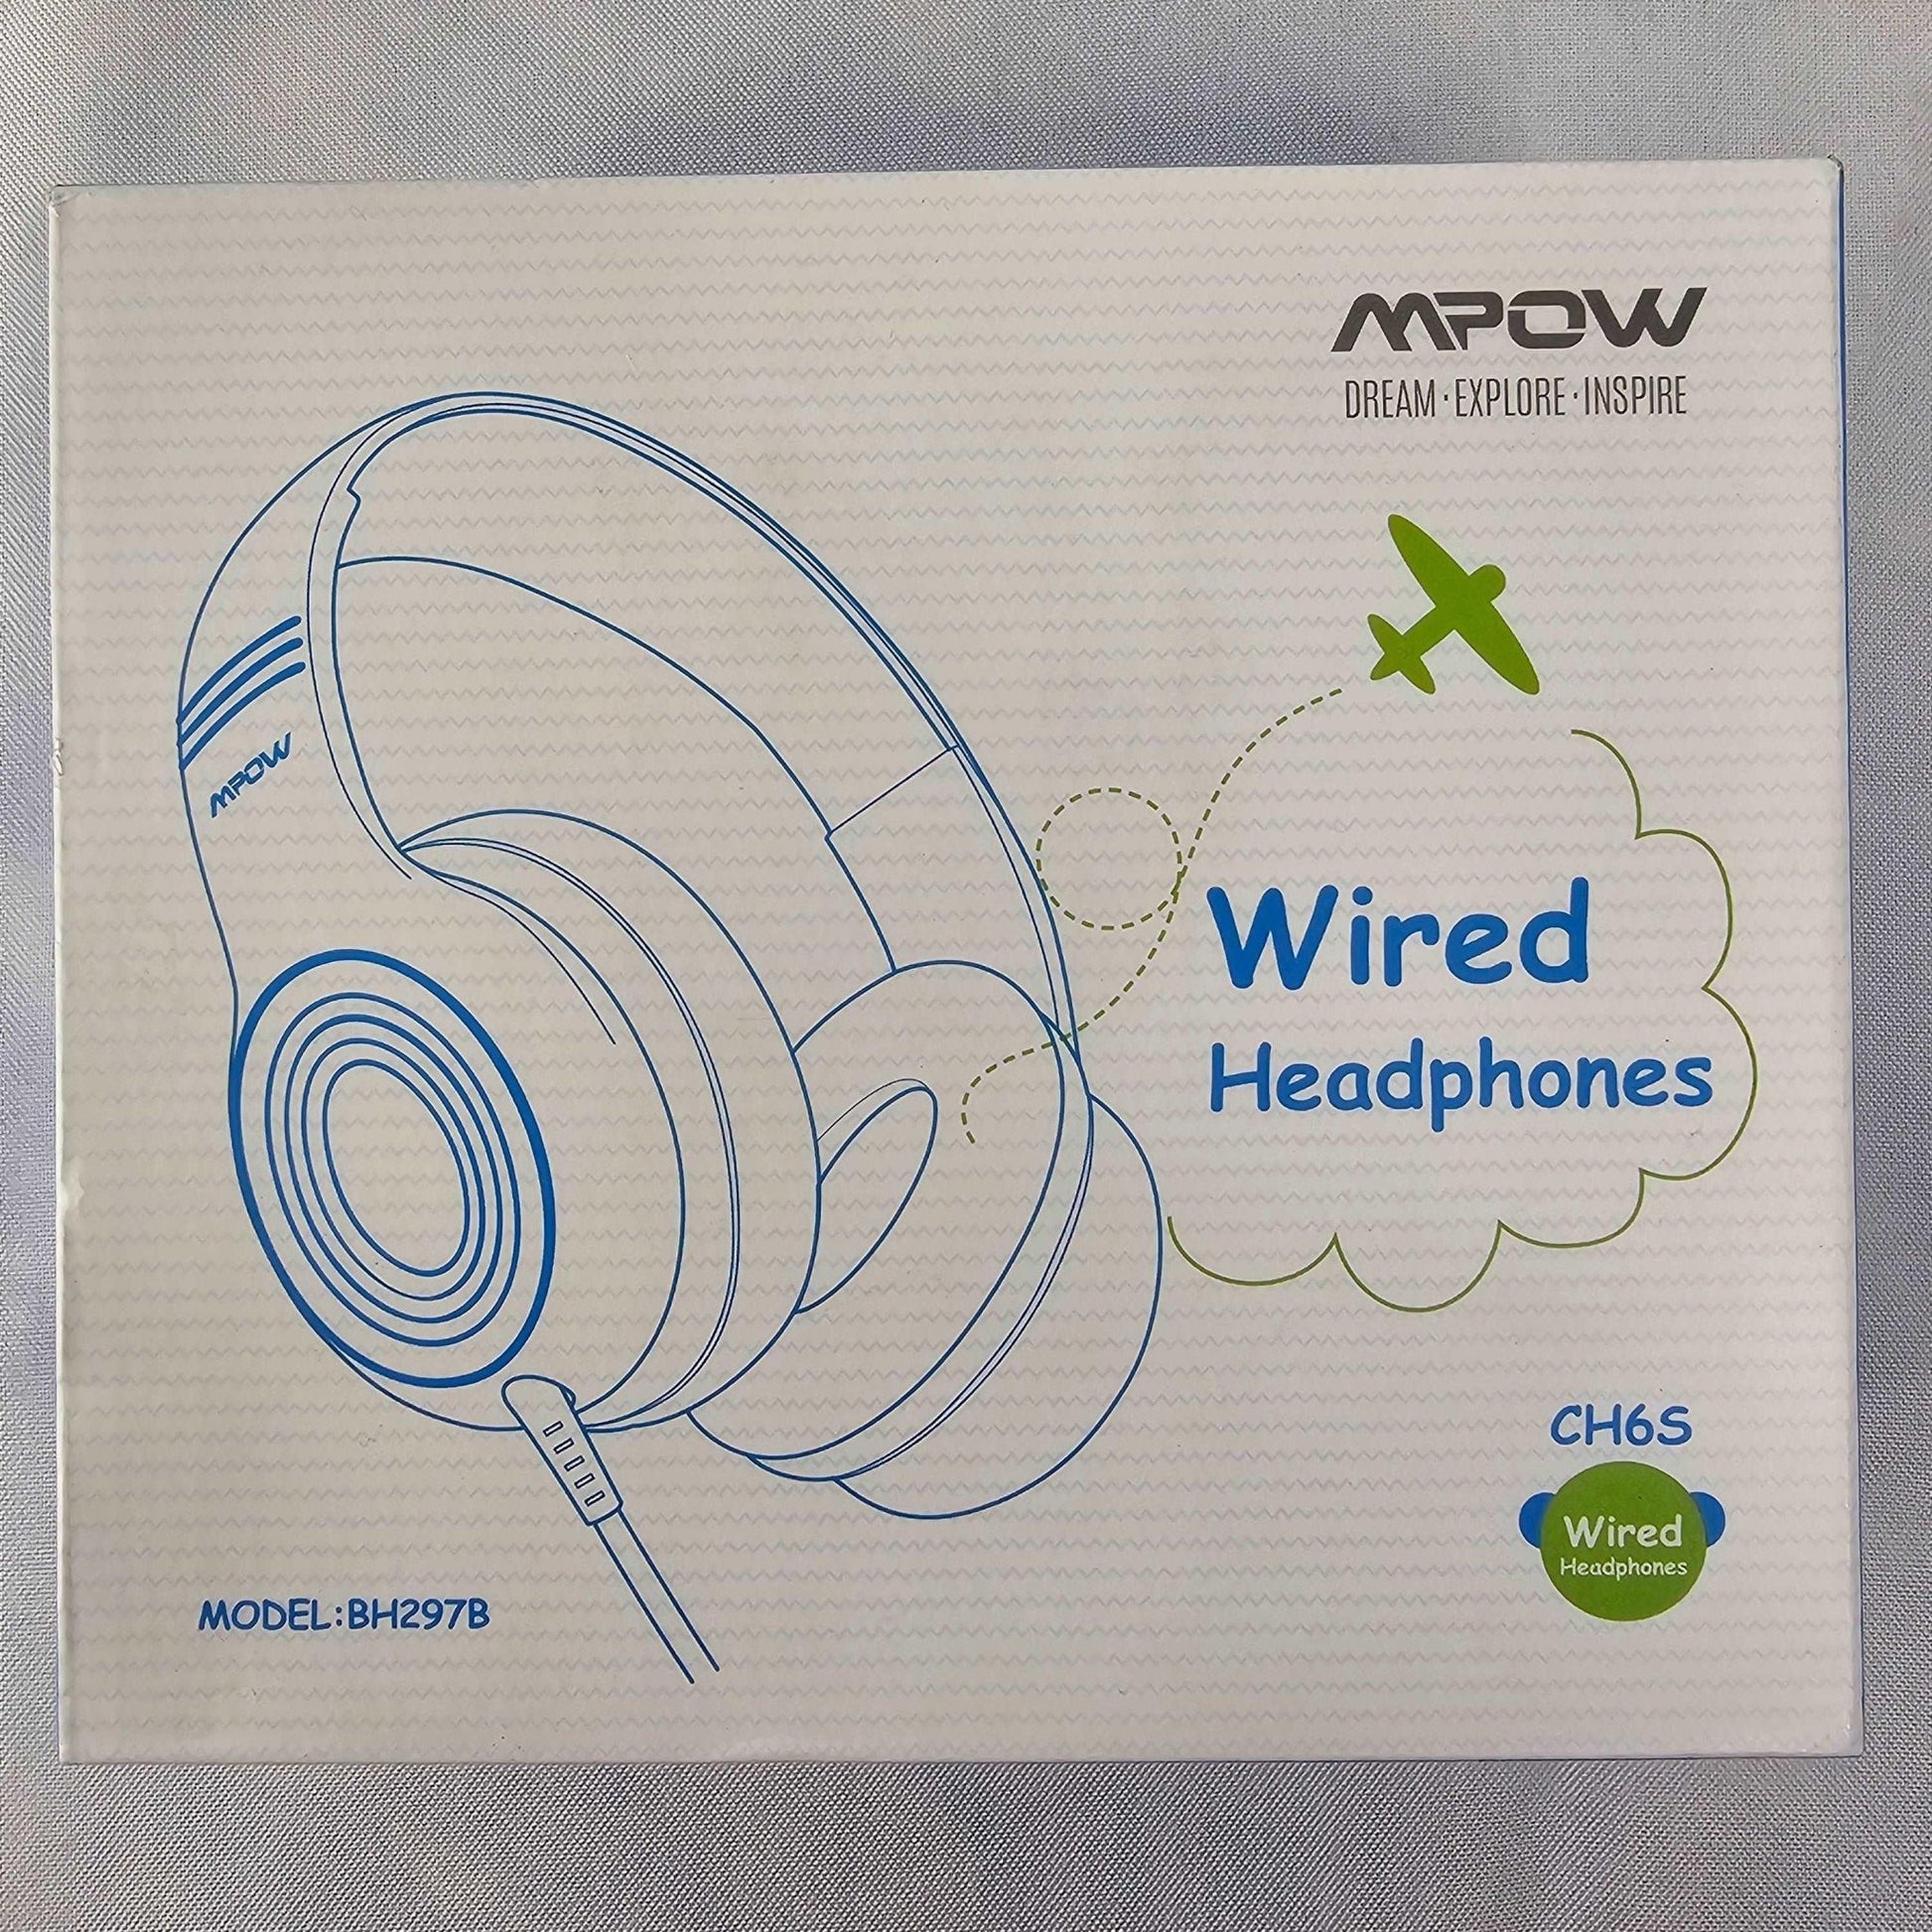 Kids Wired Headphones - Safe Audio, Music Sharing, Foldable Design - DQ Distribution